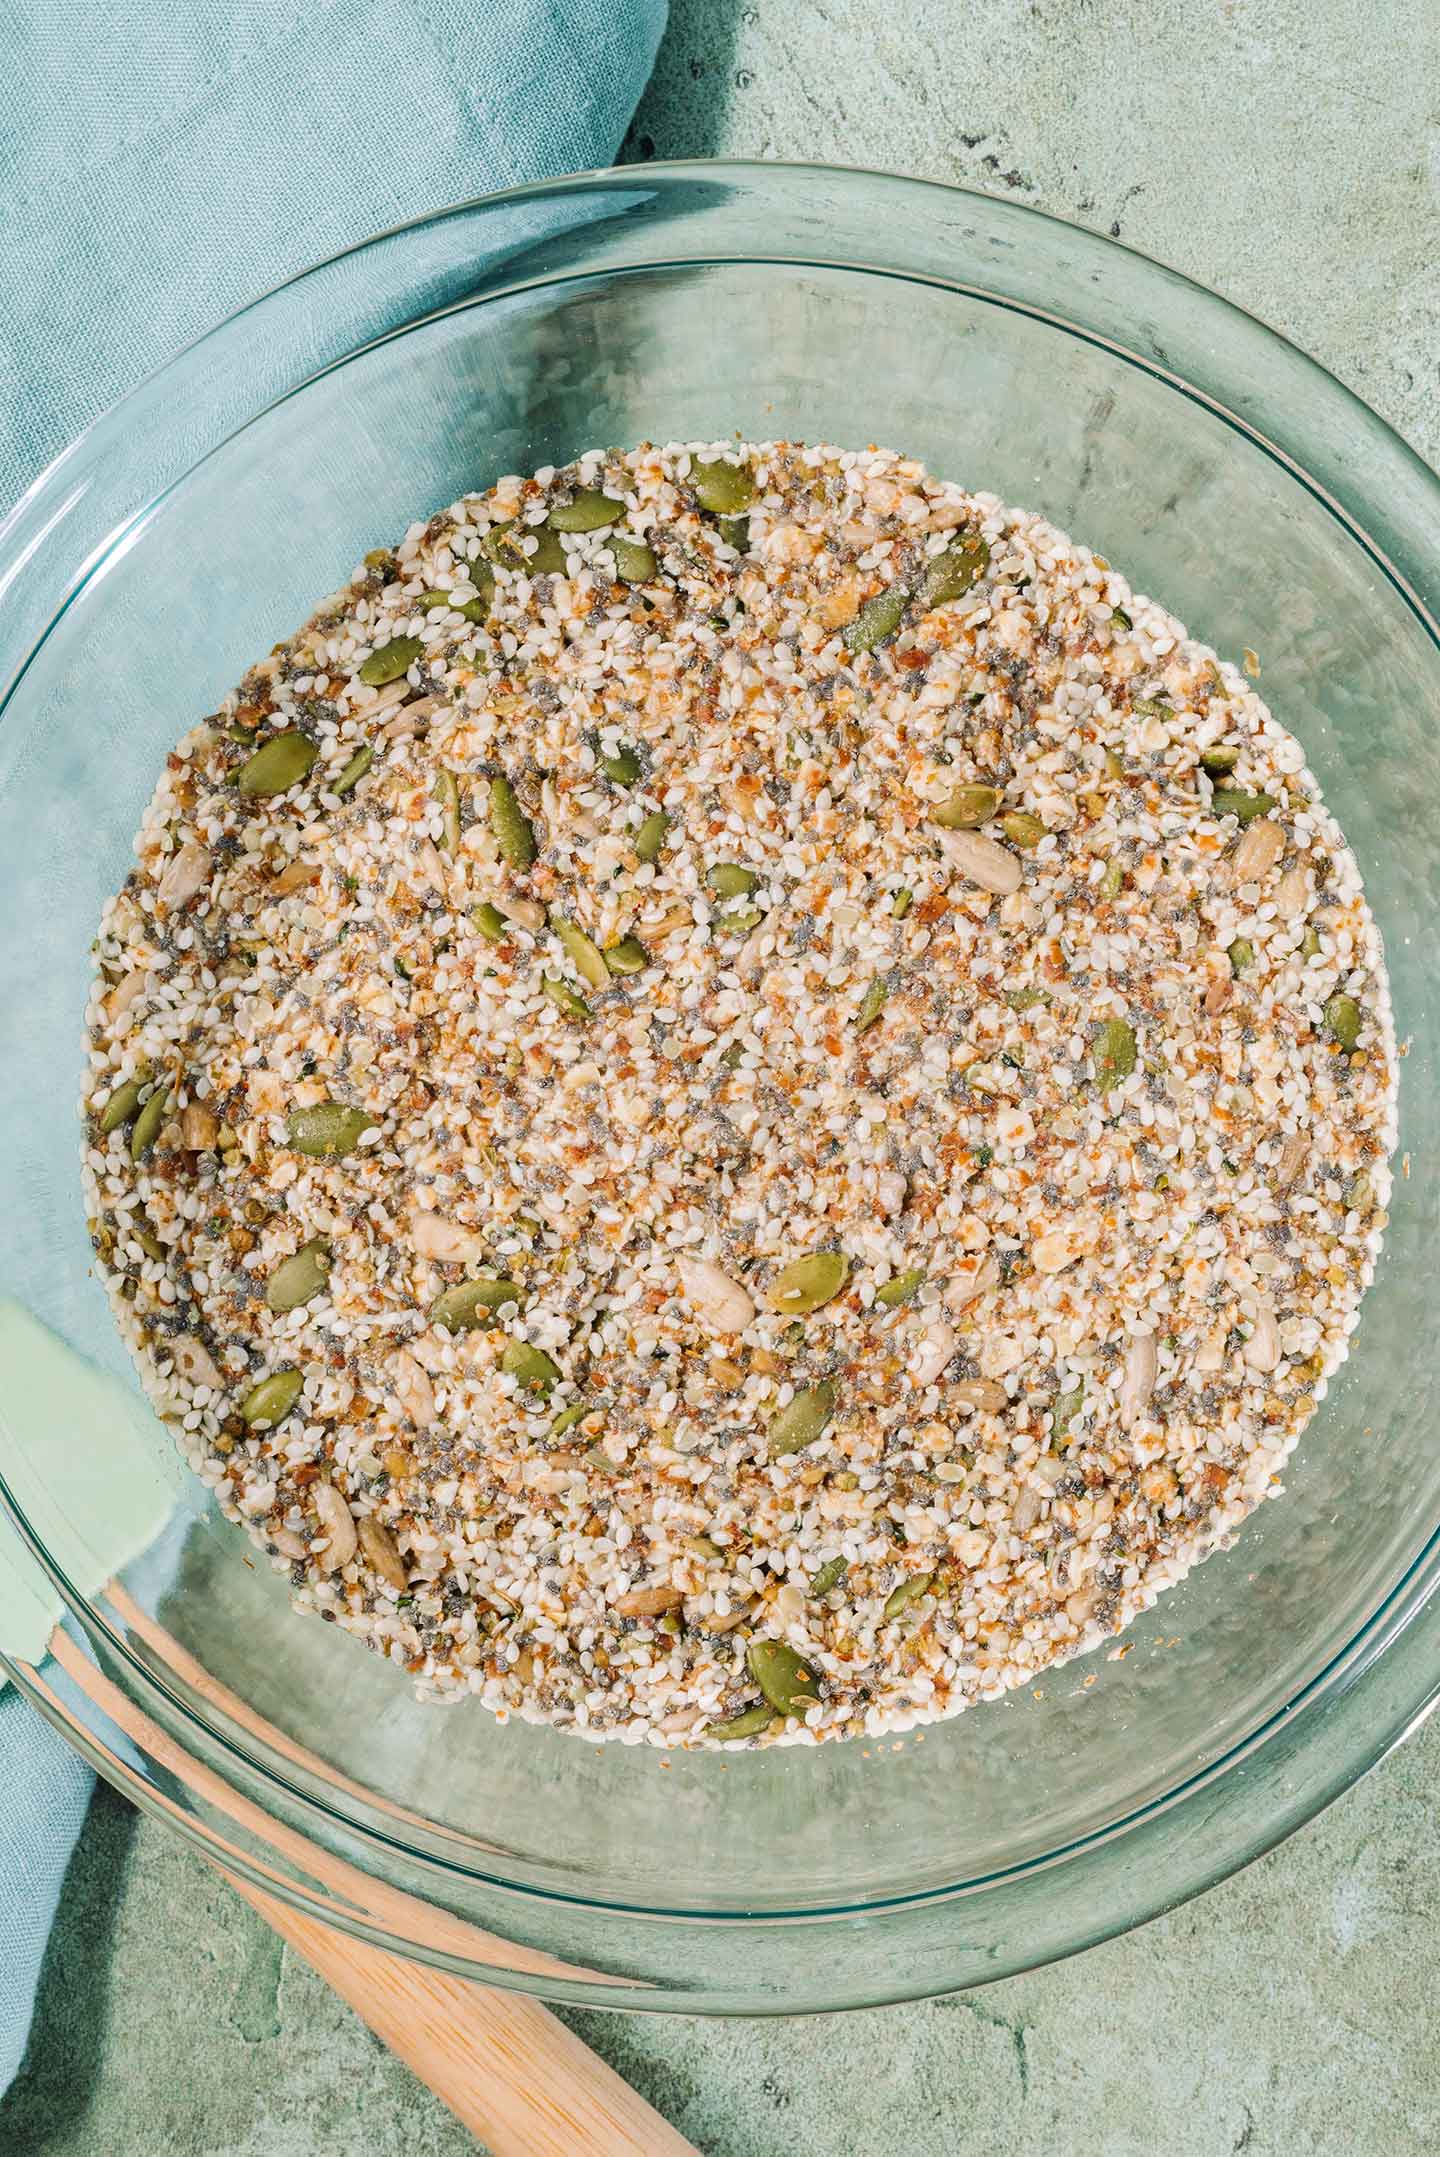 Top down view of a mixture of seeds in a bowl absorbing water to create a dough.